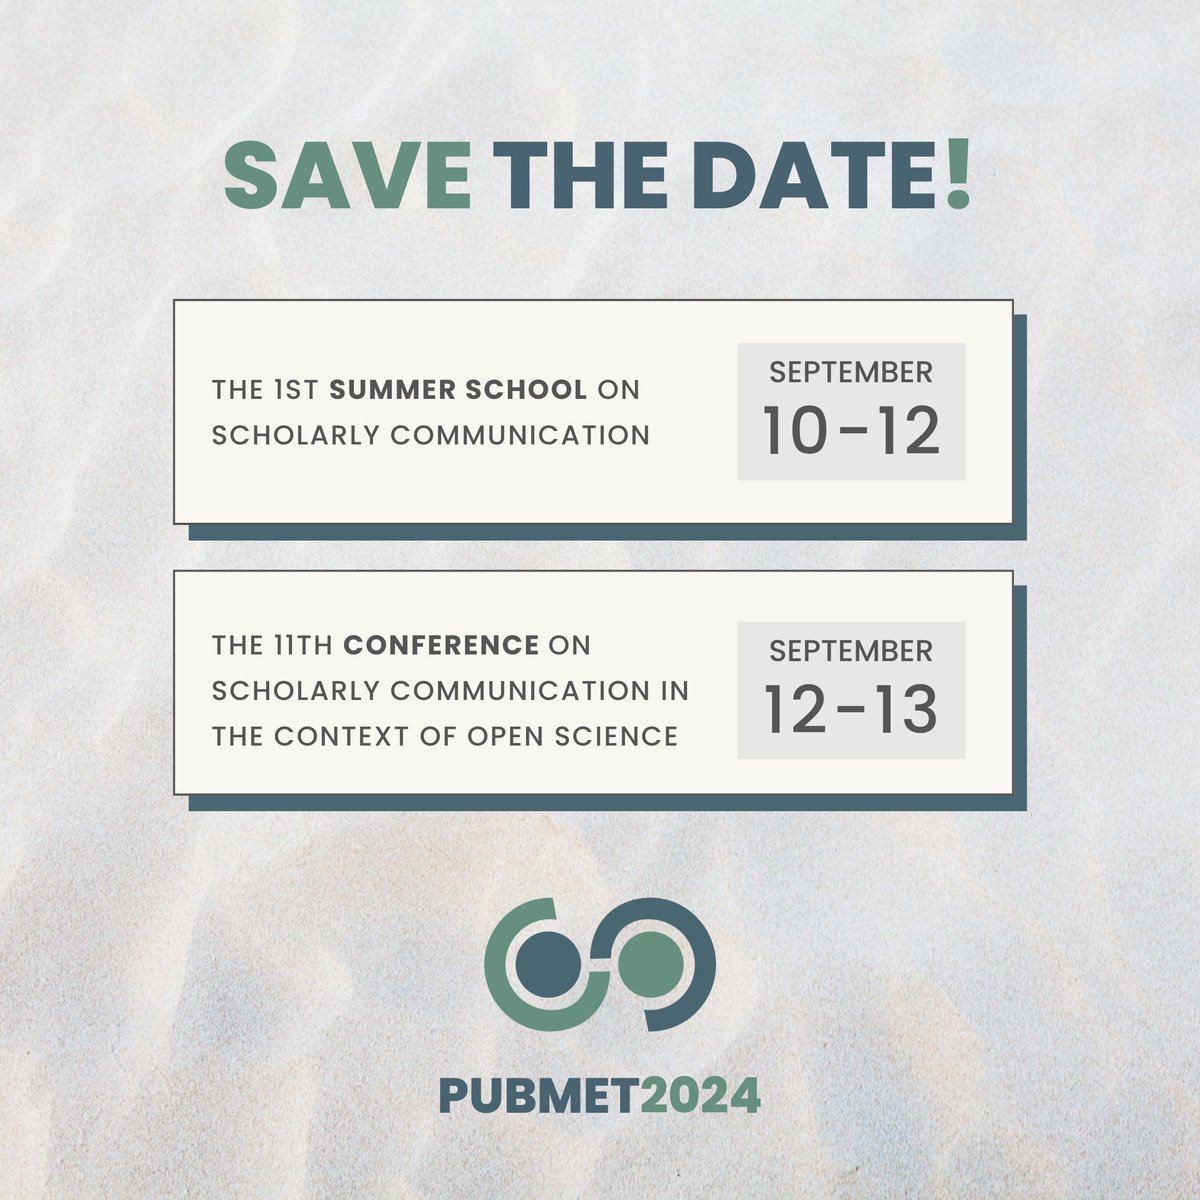 📅Save the Date: Sept 10-13, 2024! #PUBMET2024 brings you the 1st Summer School on Scholarly Communication and the 11th Conference on Research Assessment.